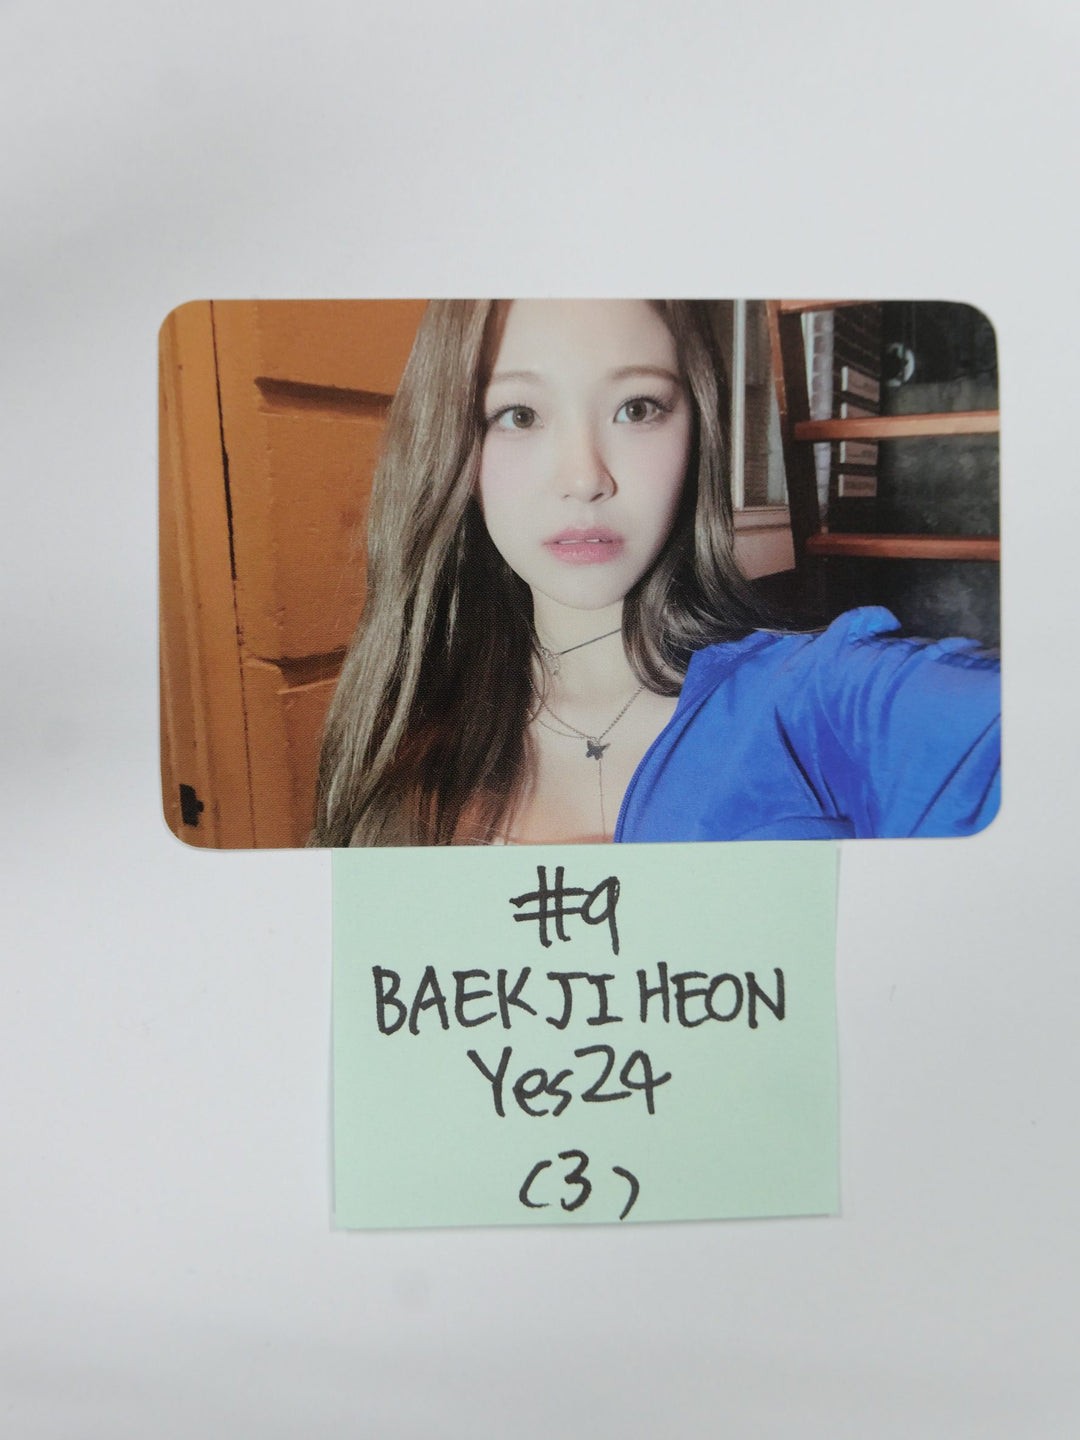 Fromis_9 "Midnight Guest" - Yes24 Fansign Event Photocard Round 2